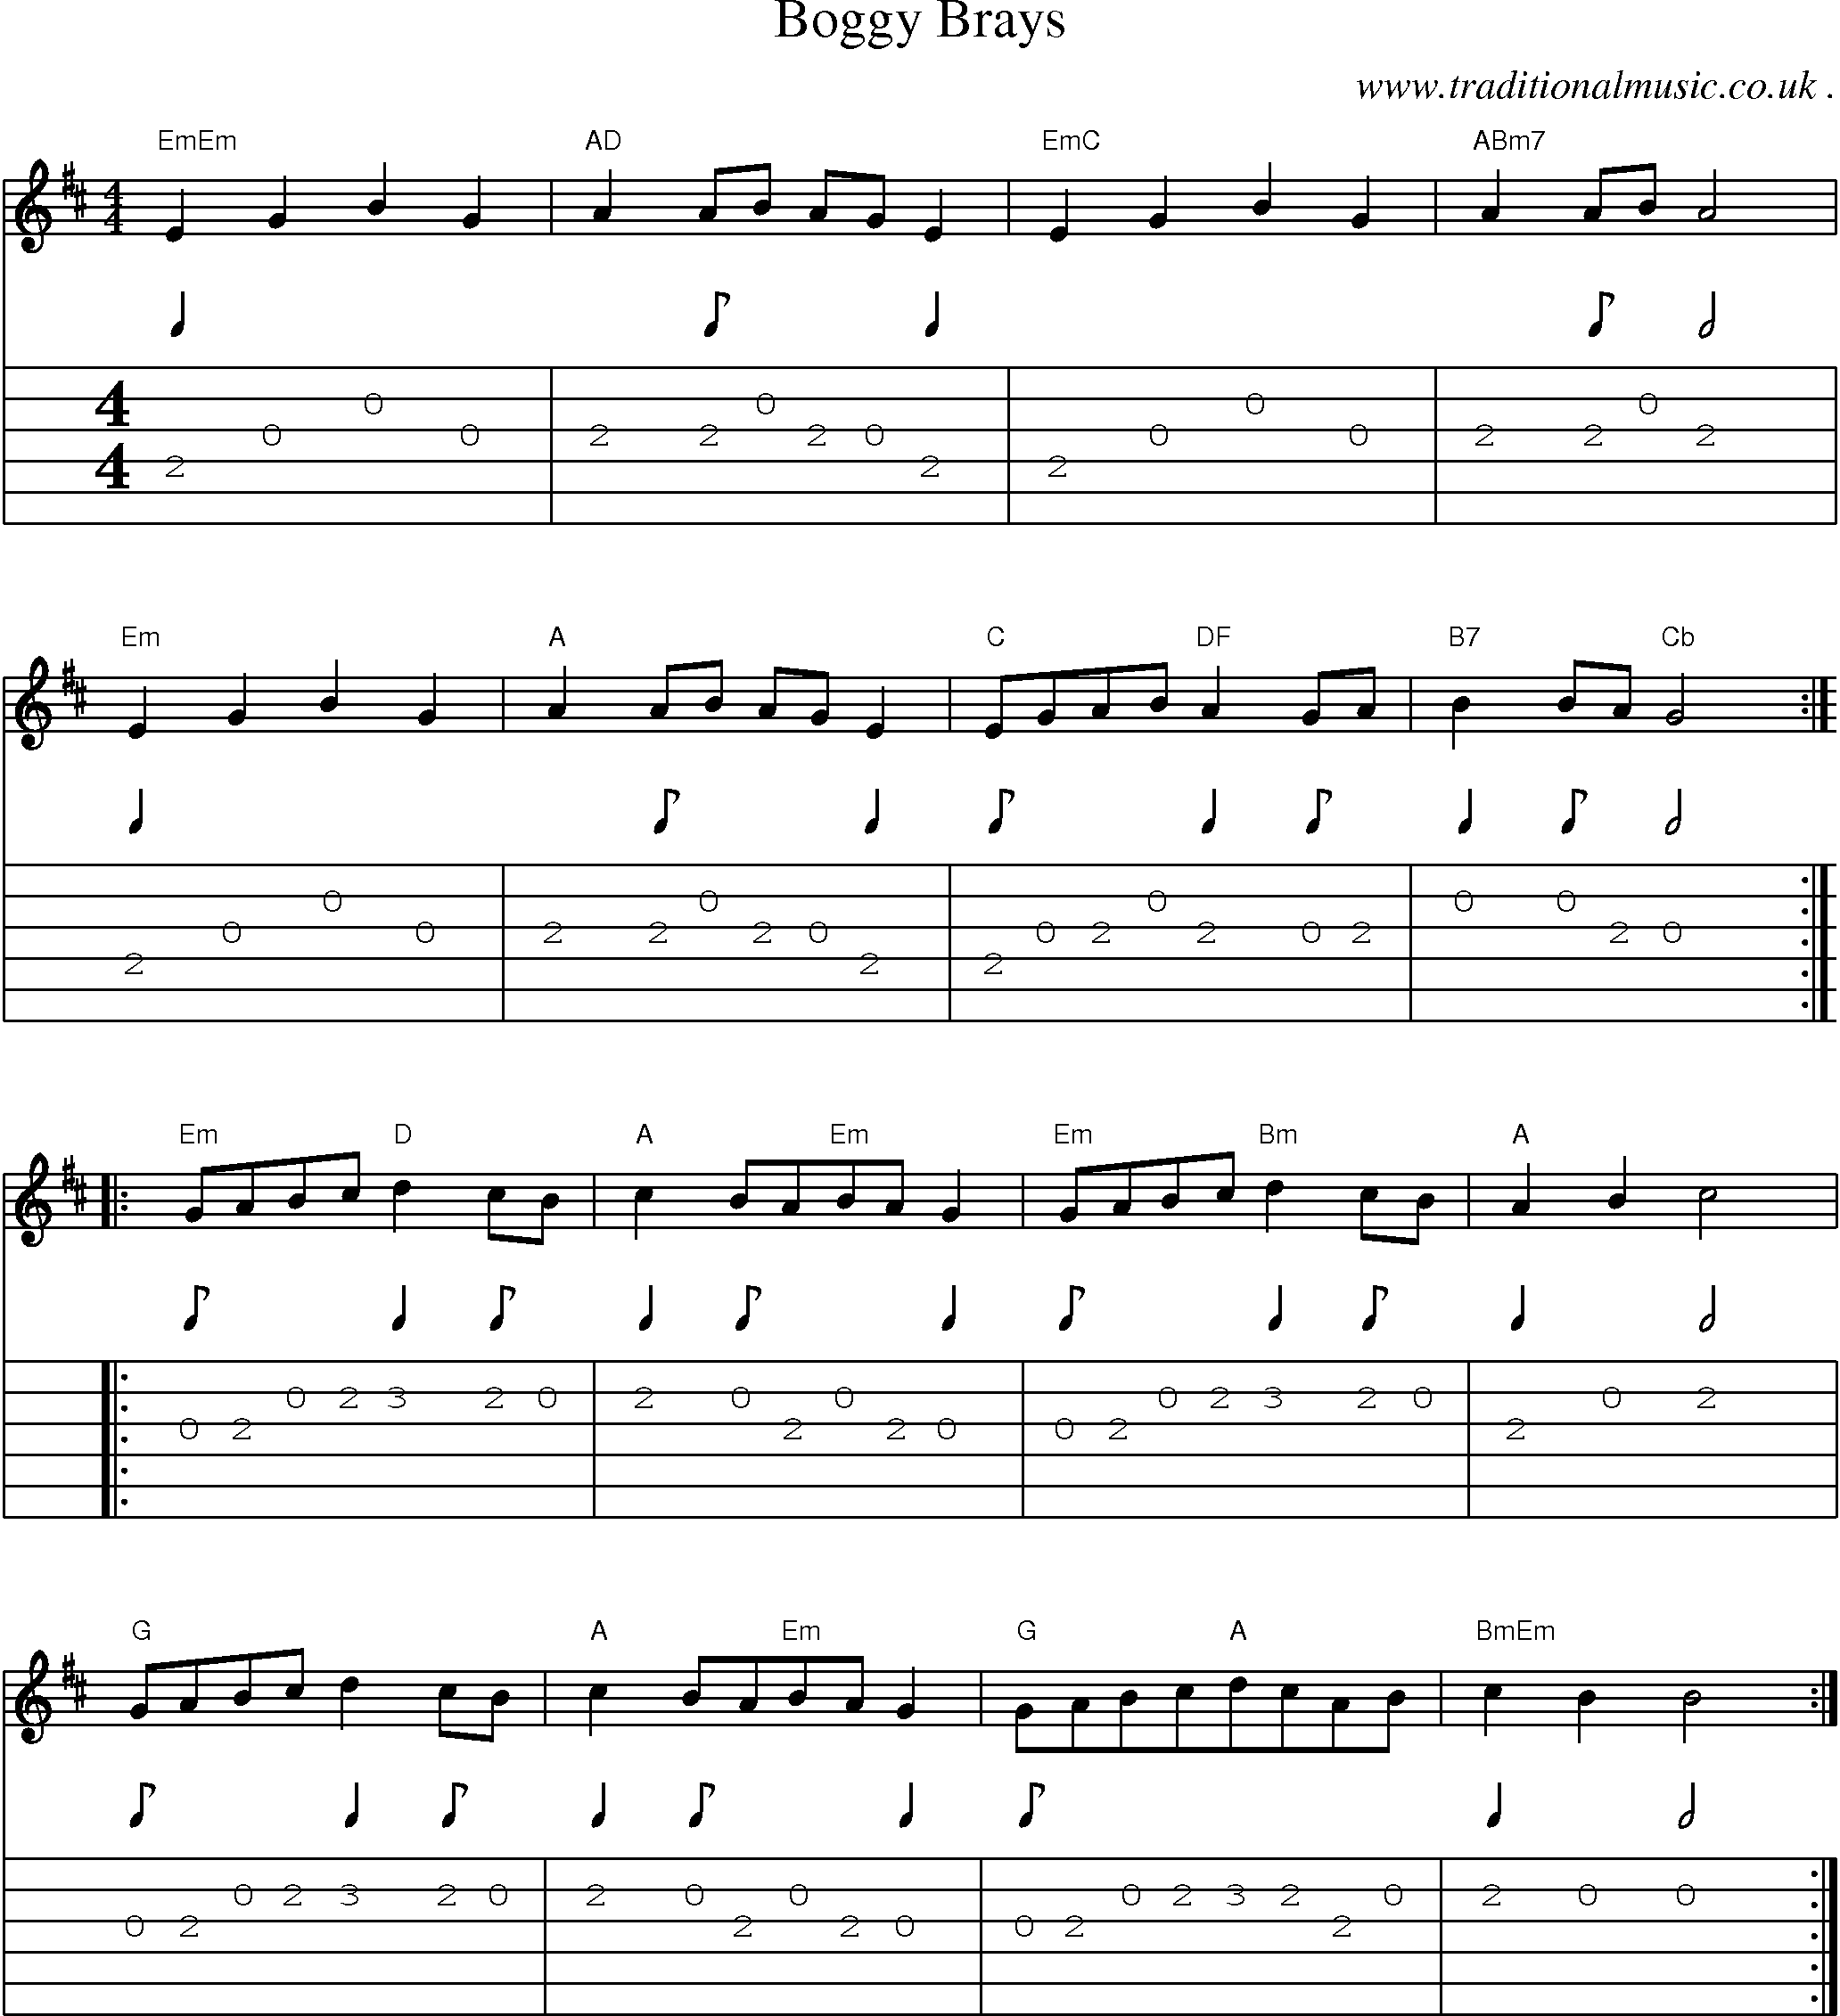 Sheet-Music and Guitar Tabs for Boggy Brays